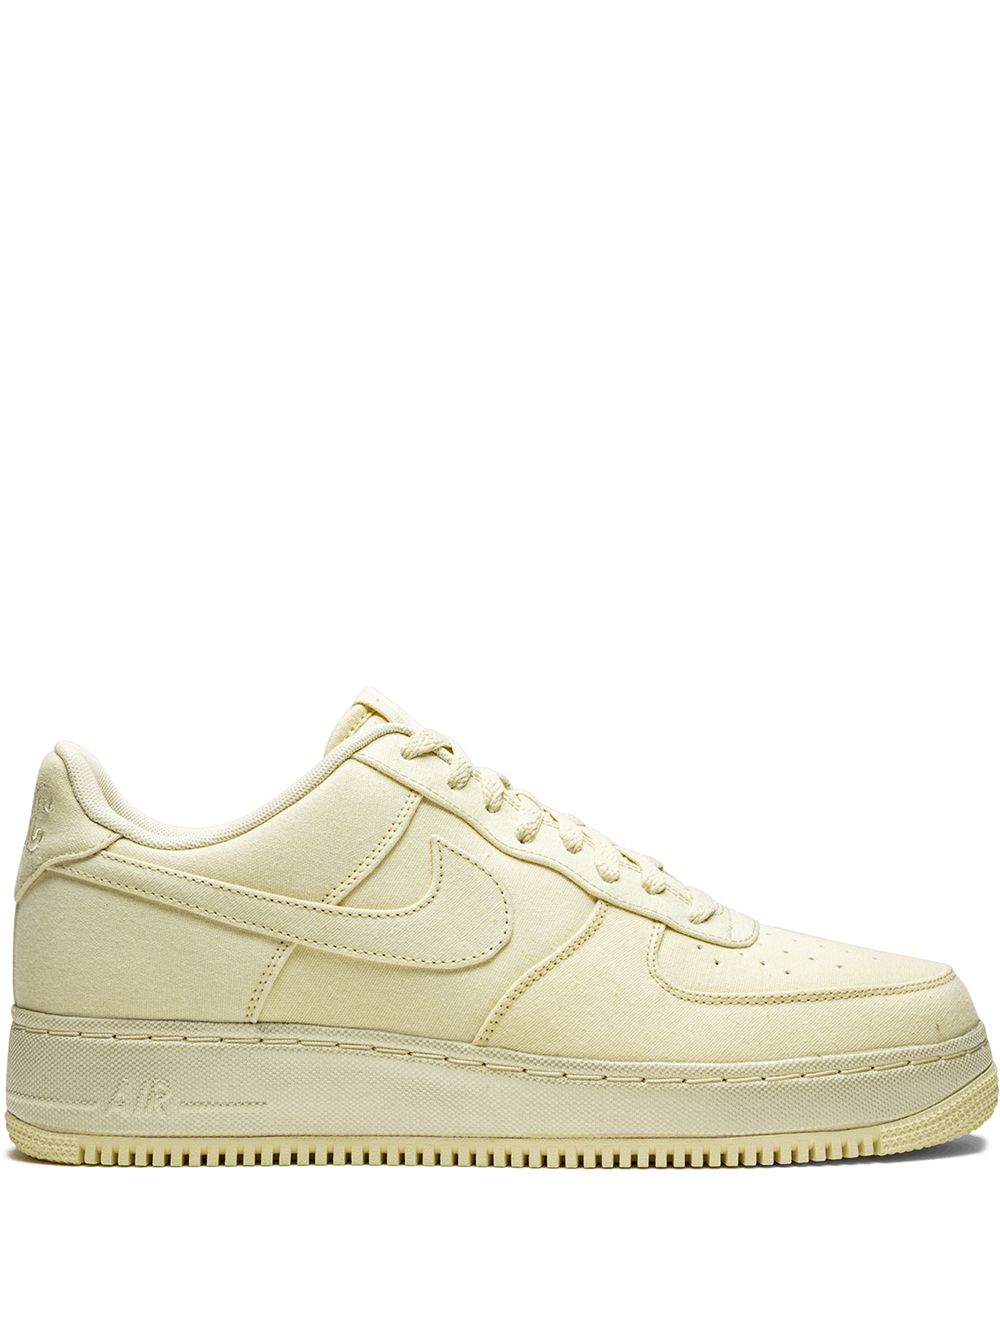 Nike Air Force 1 Low NYC Editions: Procella